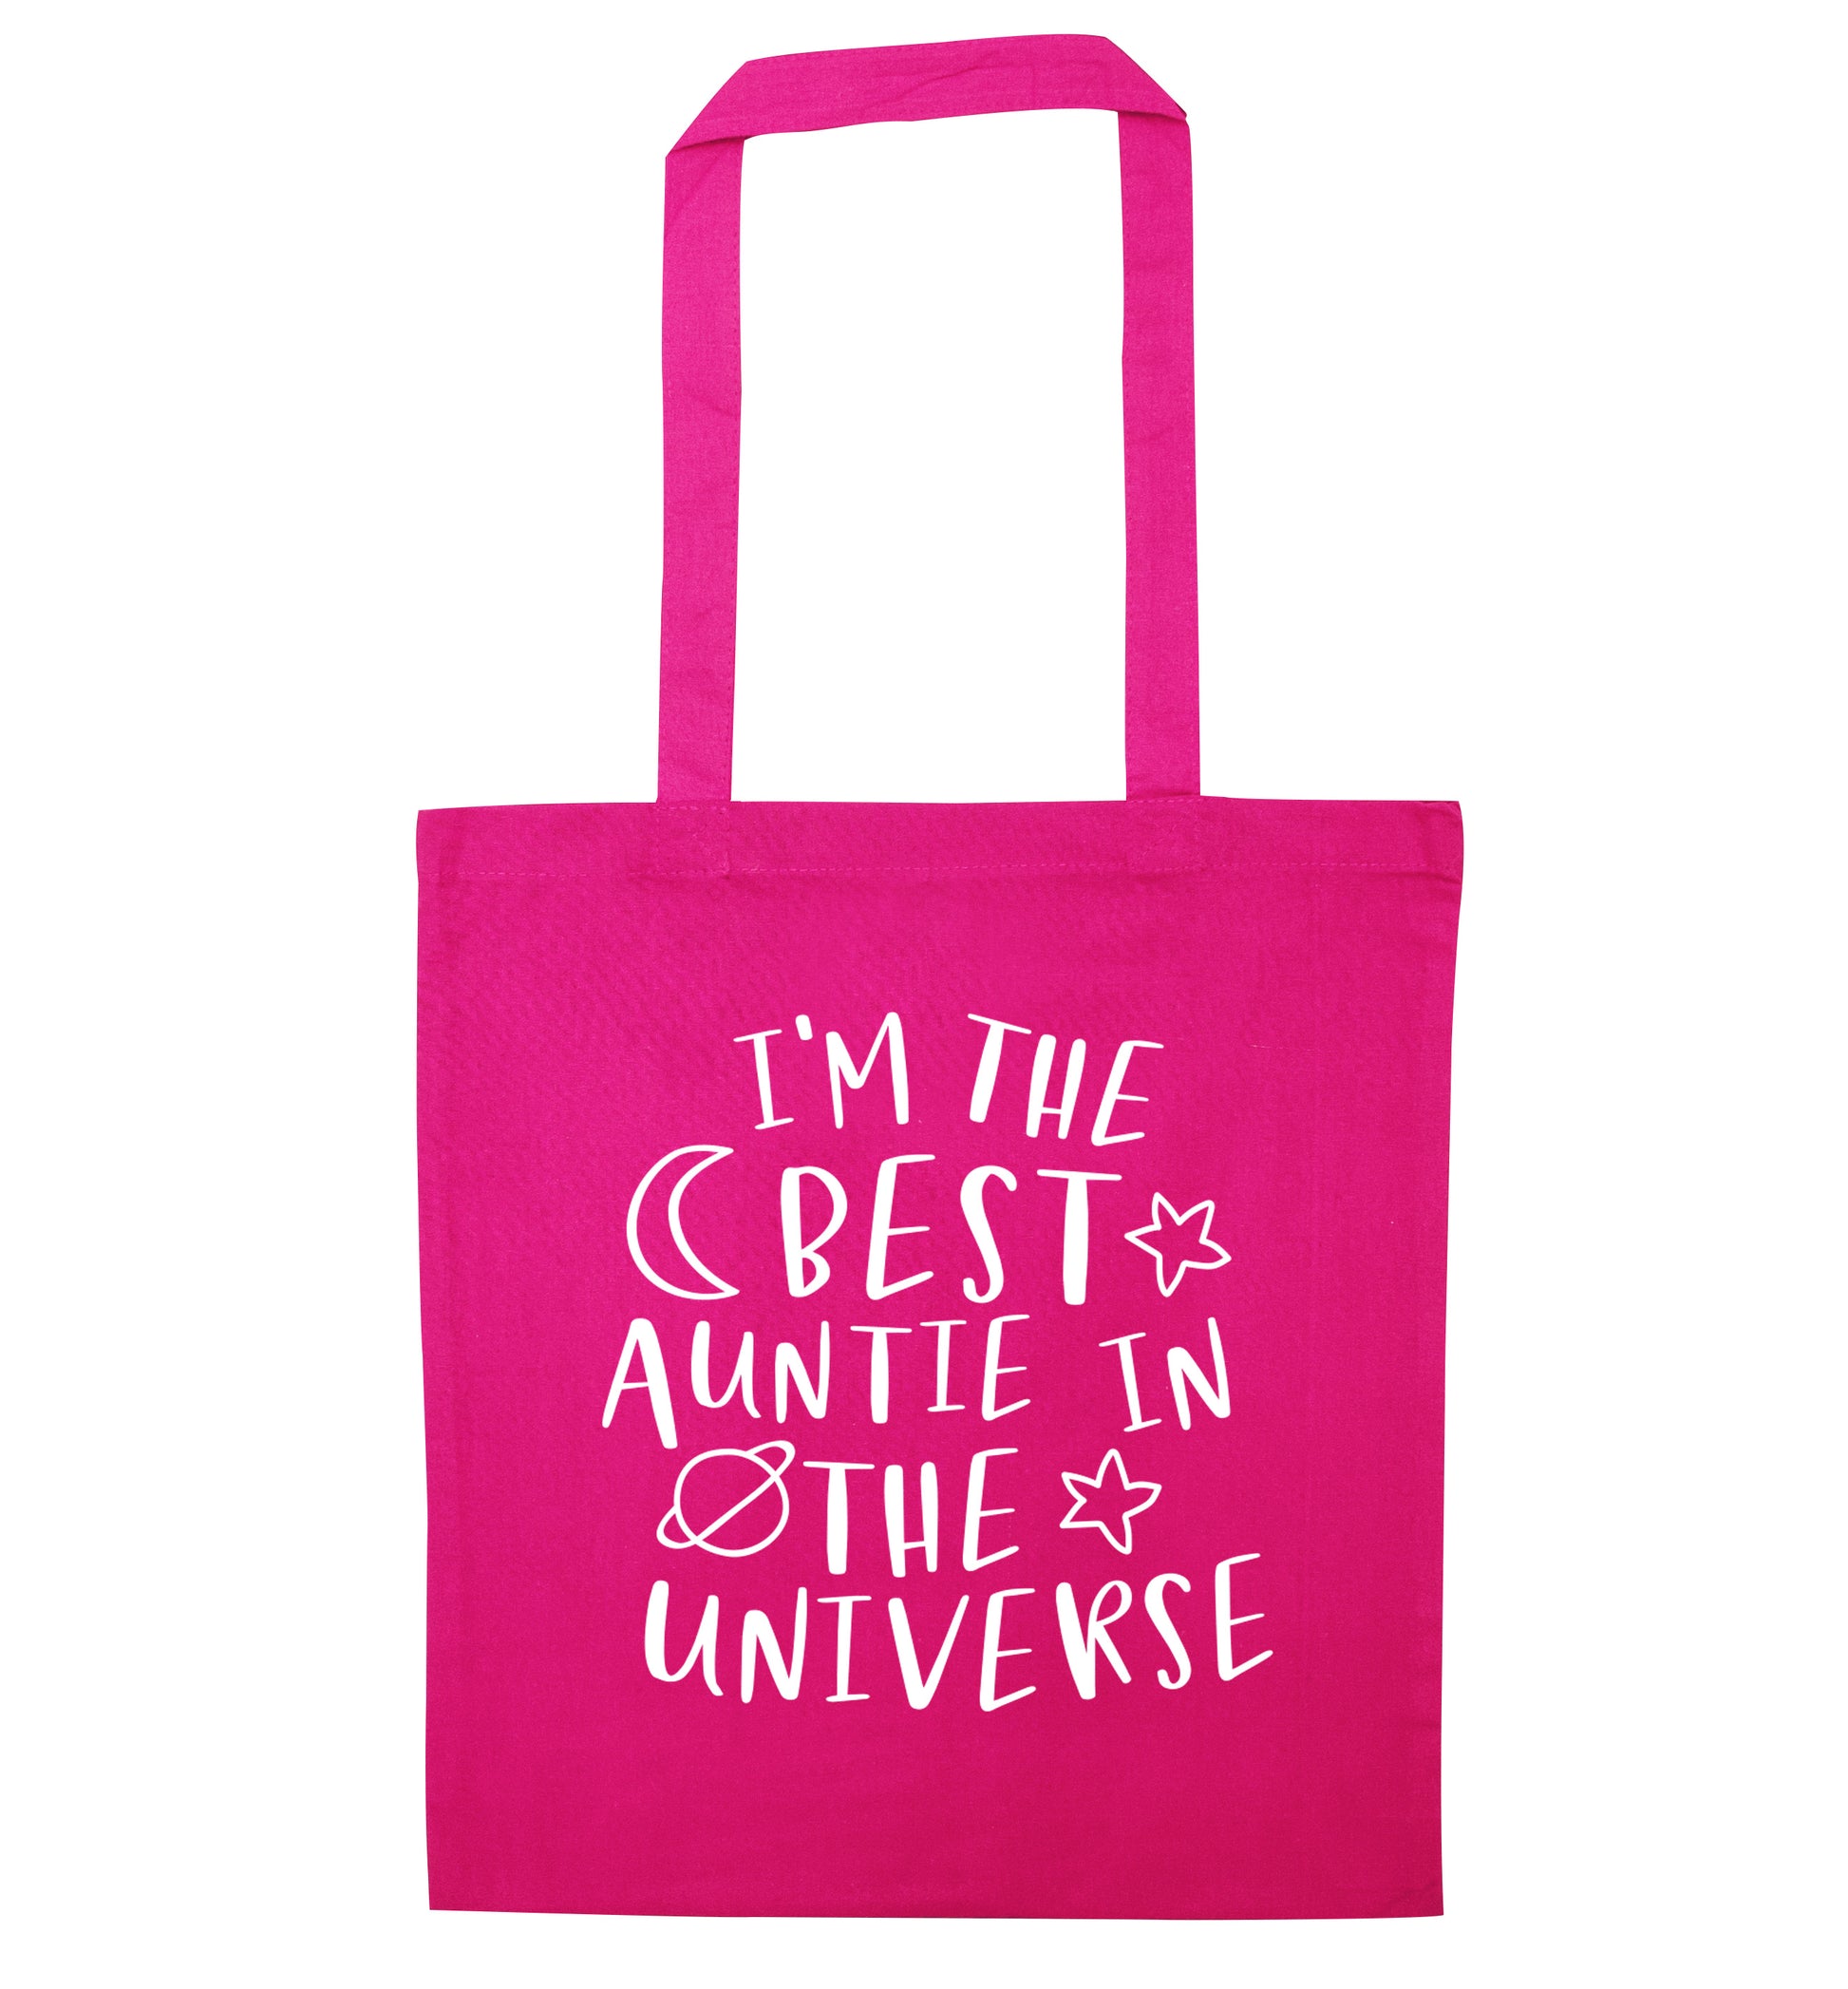 I'm the best auntie in the universe pink tote bag